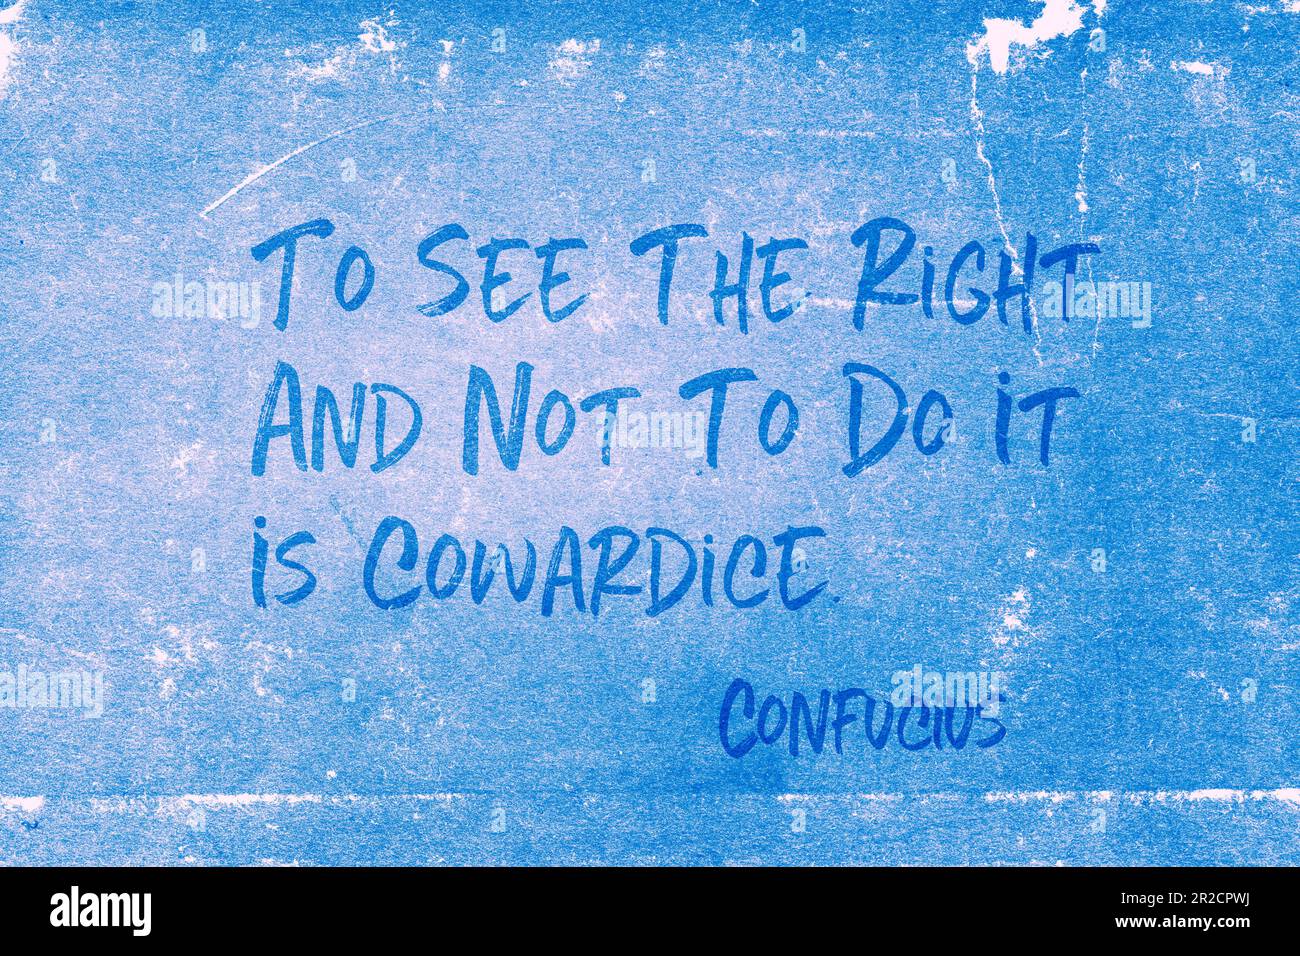 To see the right and not to do it is cowardice - ancient Chinese philosopher Confucius quote printed on grunge blue paper Stock Photo